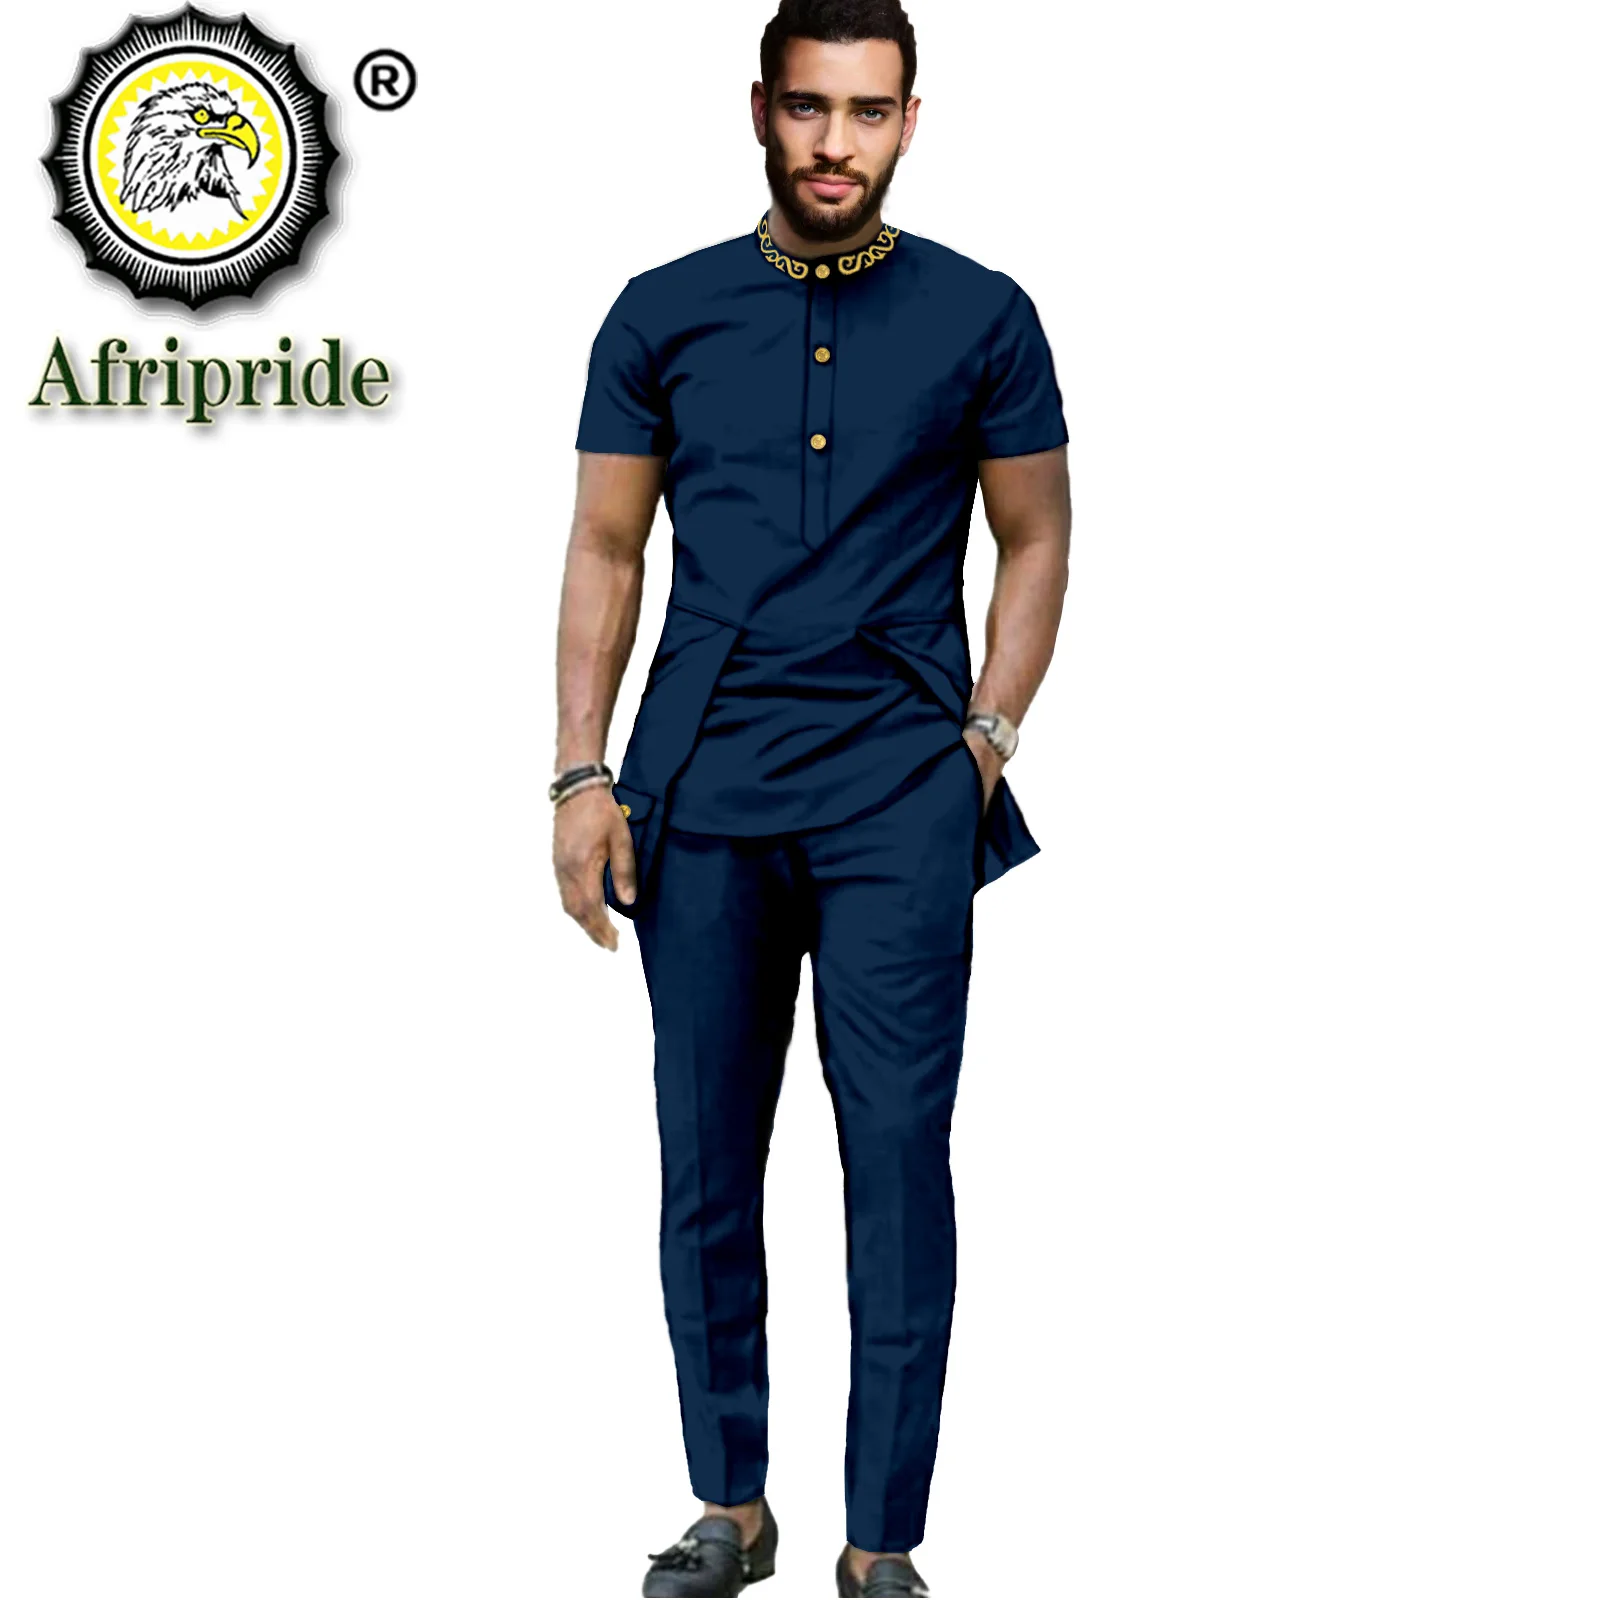 African Clothes for Men Embroidery Short Sleeve Shirt and Pant 2 Piece Set Dashiki Outfit Plus Size Tracksuit Blouse S2116011 african dashiki clothes for men traditional outfits tribal shirts and pants 2 piece set tracksuit outfits blouse casual a2016055